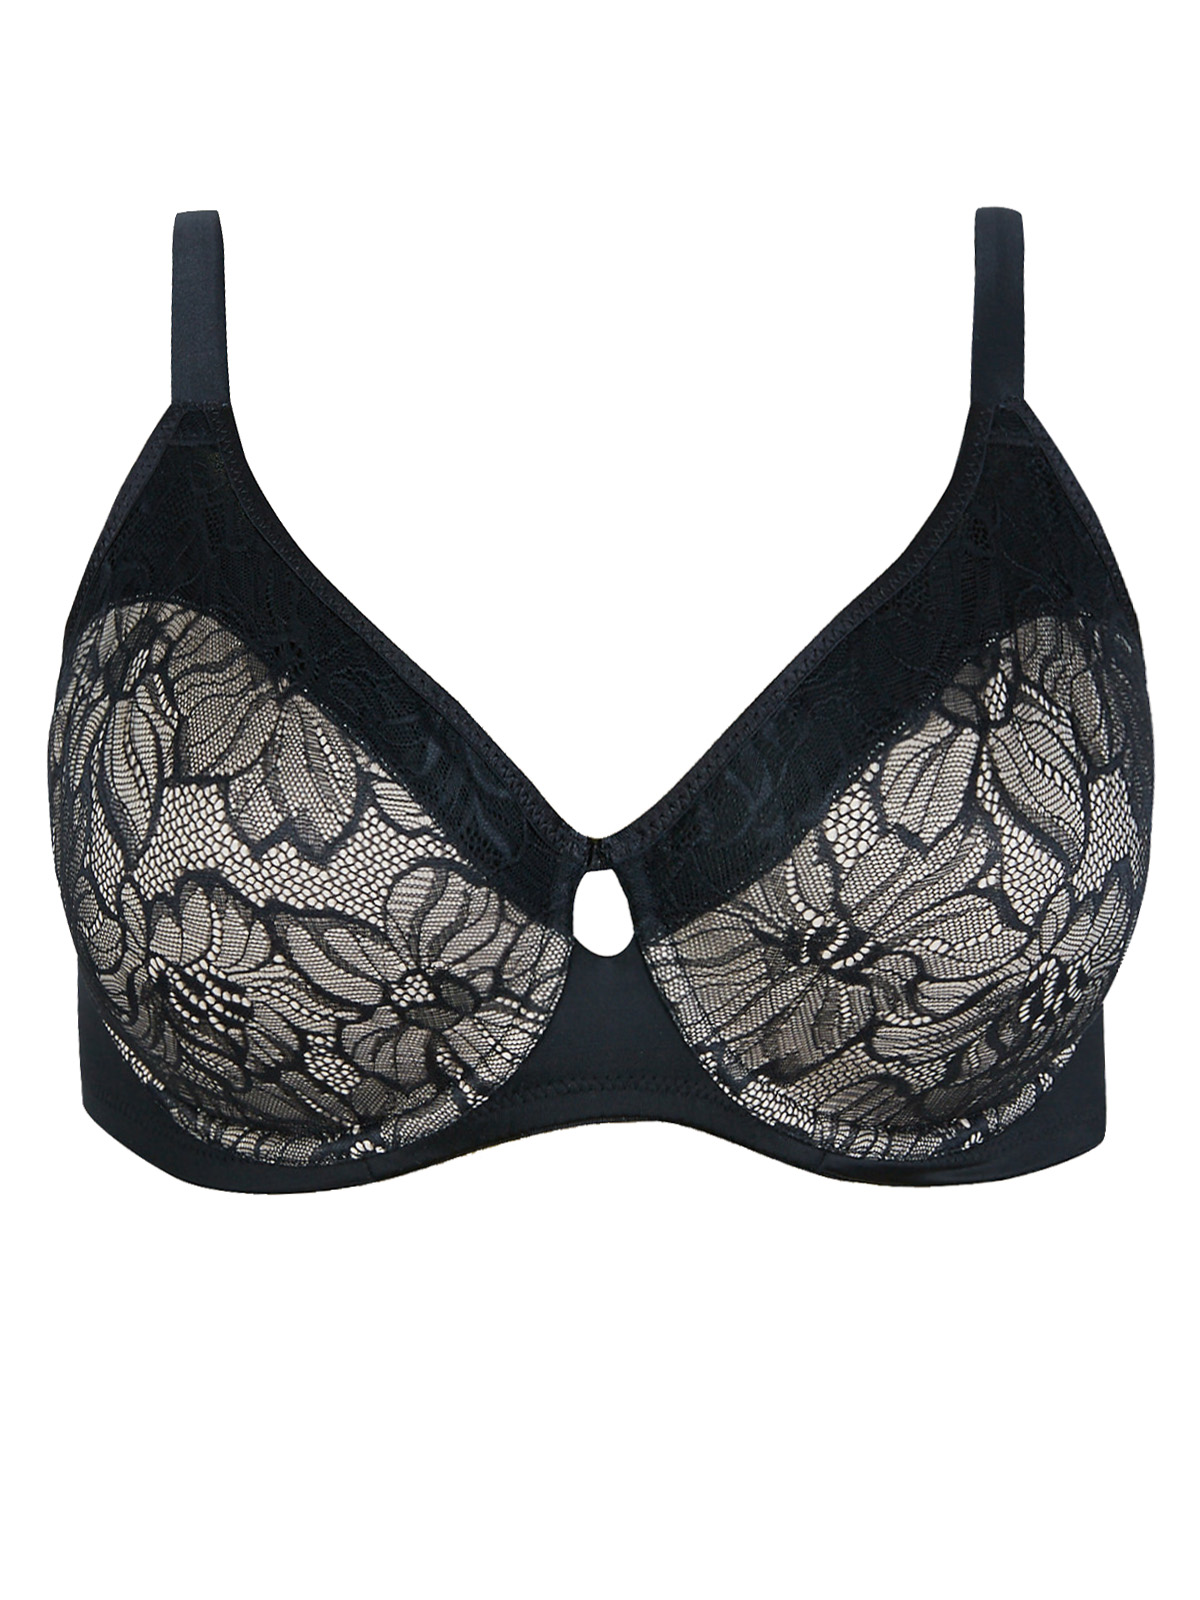 Marks and Spencer - - M&5 BLACK Youthful Lift Lace Non-Padded Full Cup